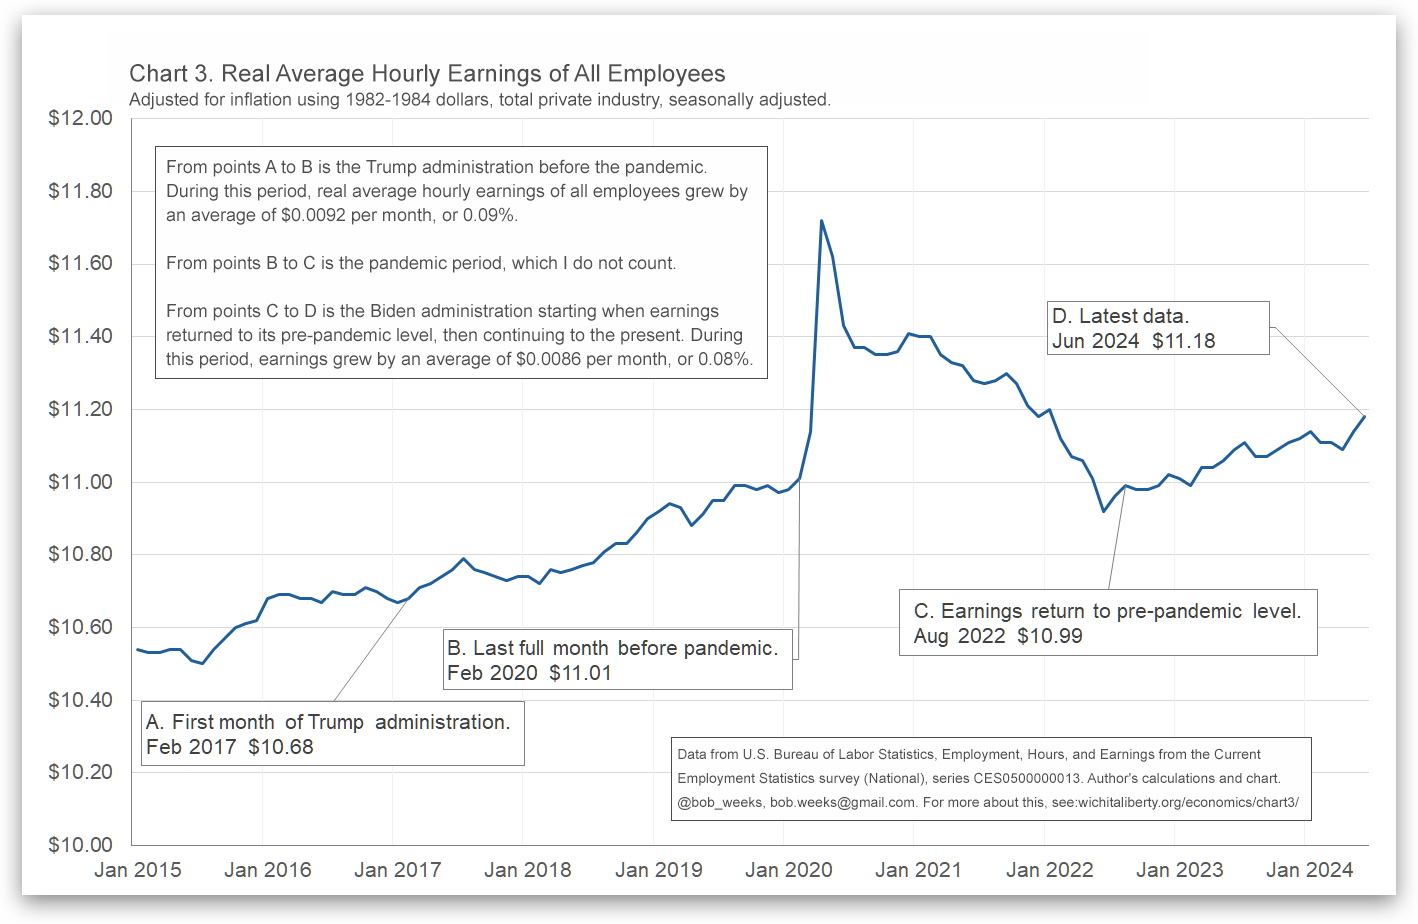 Hourly Earnings, pre- and post-Covid